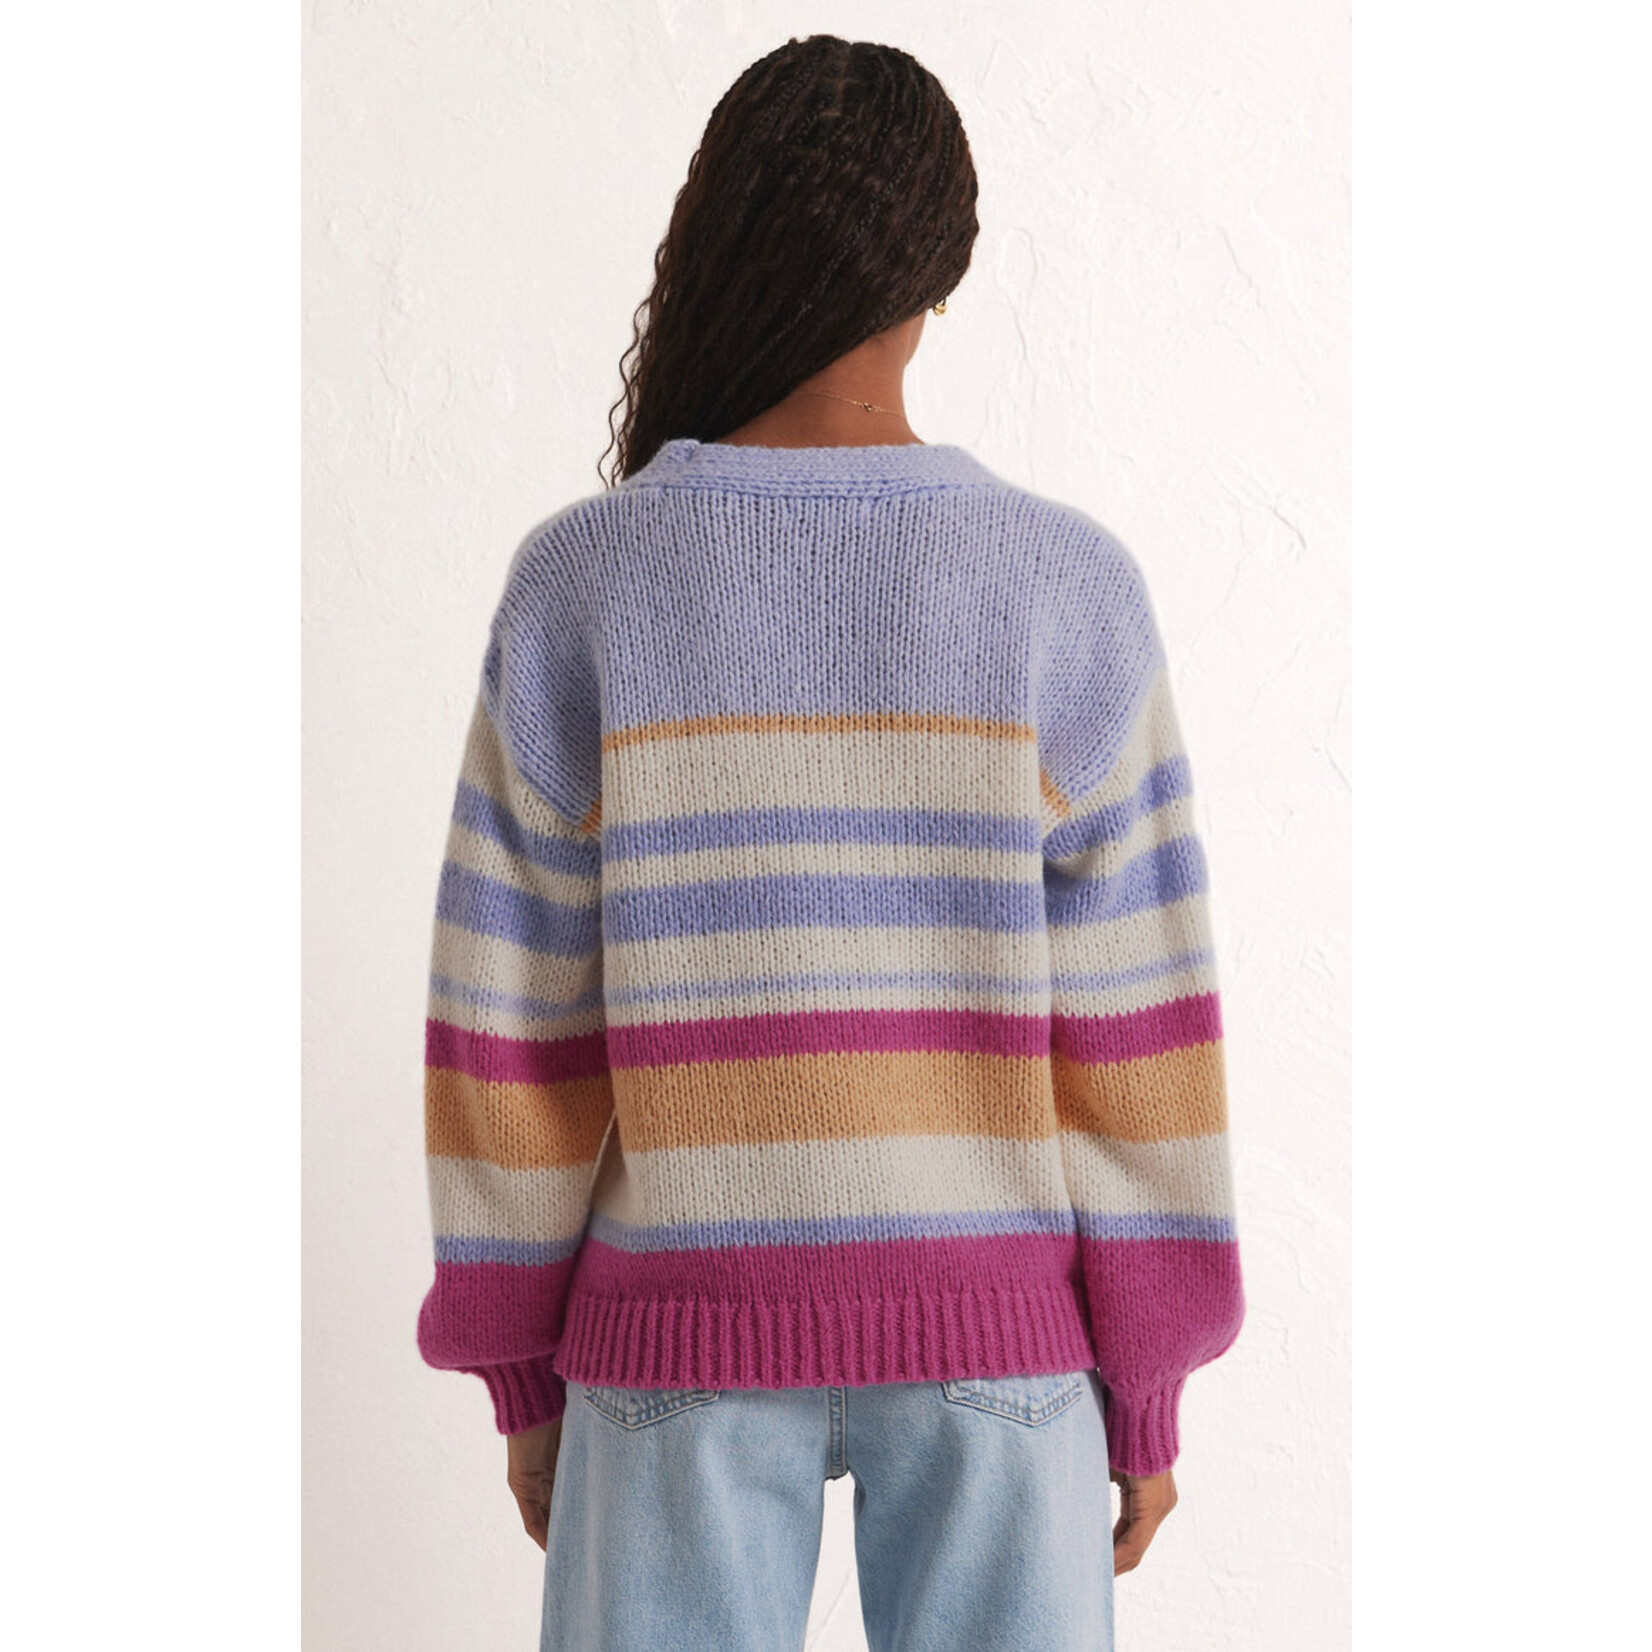 Z SUPPLY CHASING SUNSETS CARDIGAN